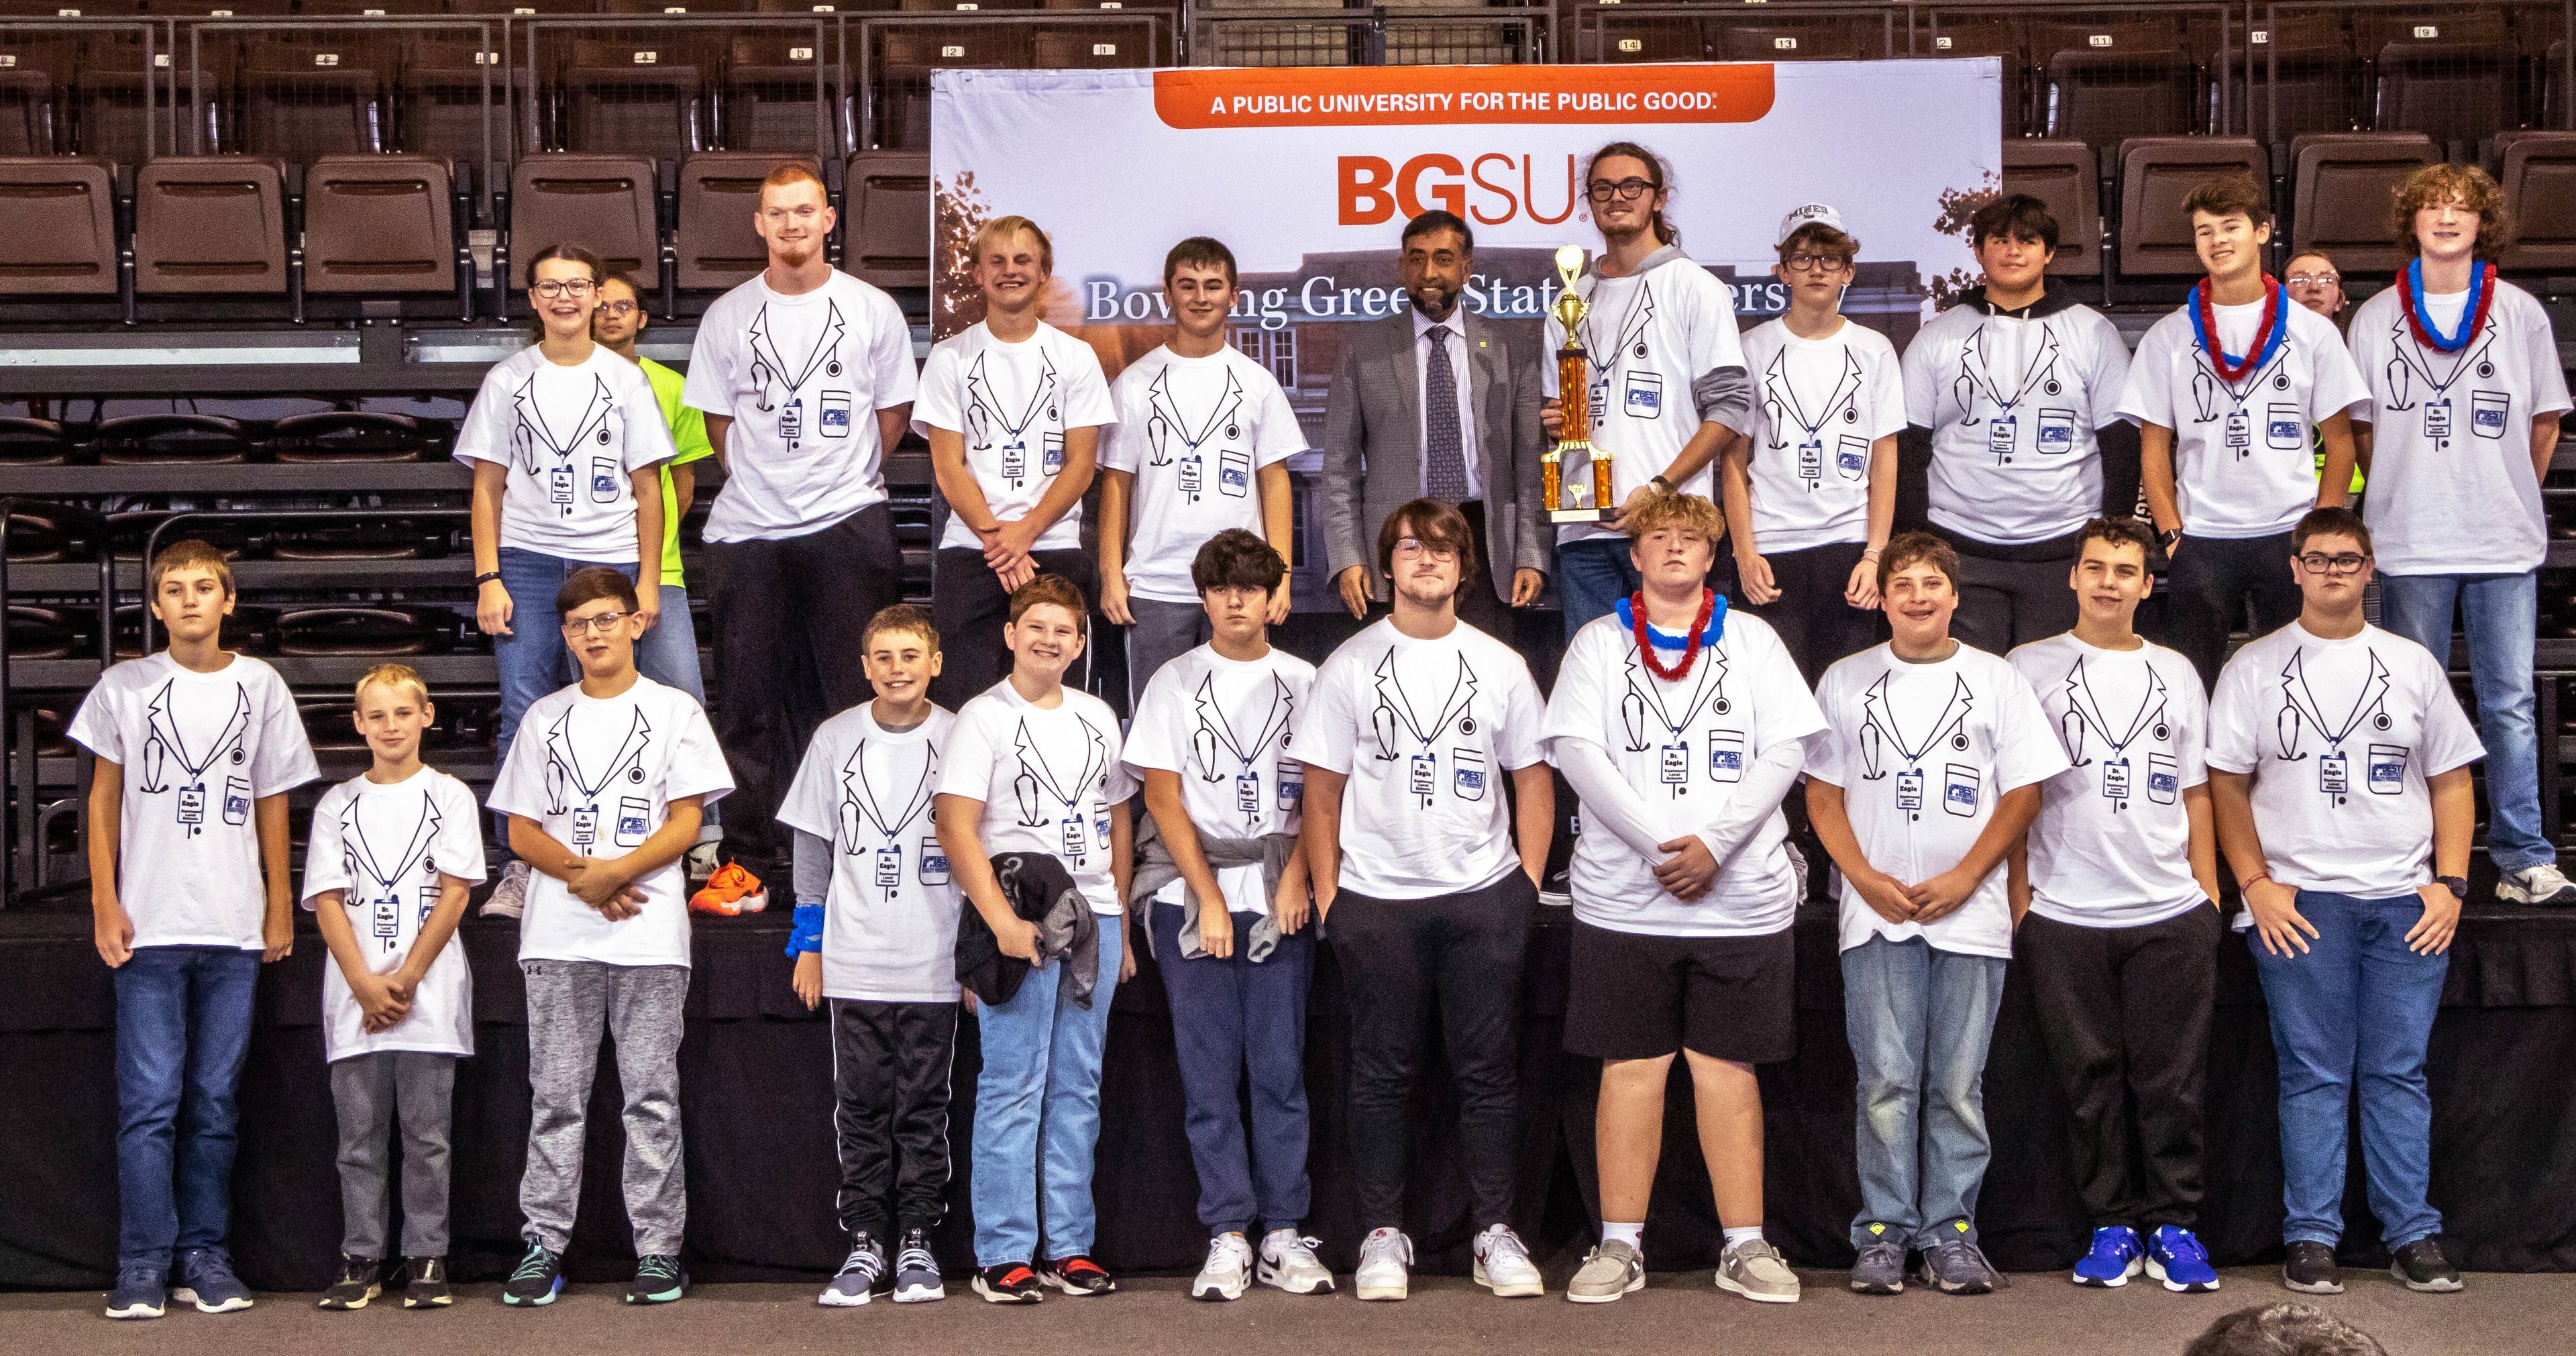 A large group of high school students pose on a stage with Dr. MD Sarder of BGSU.